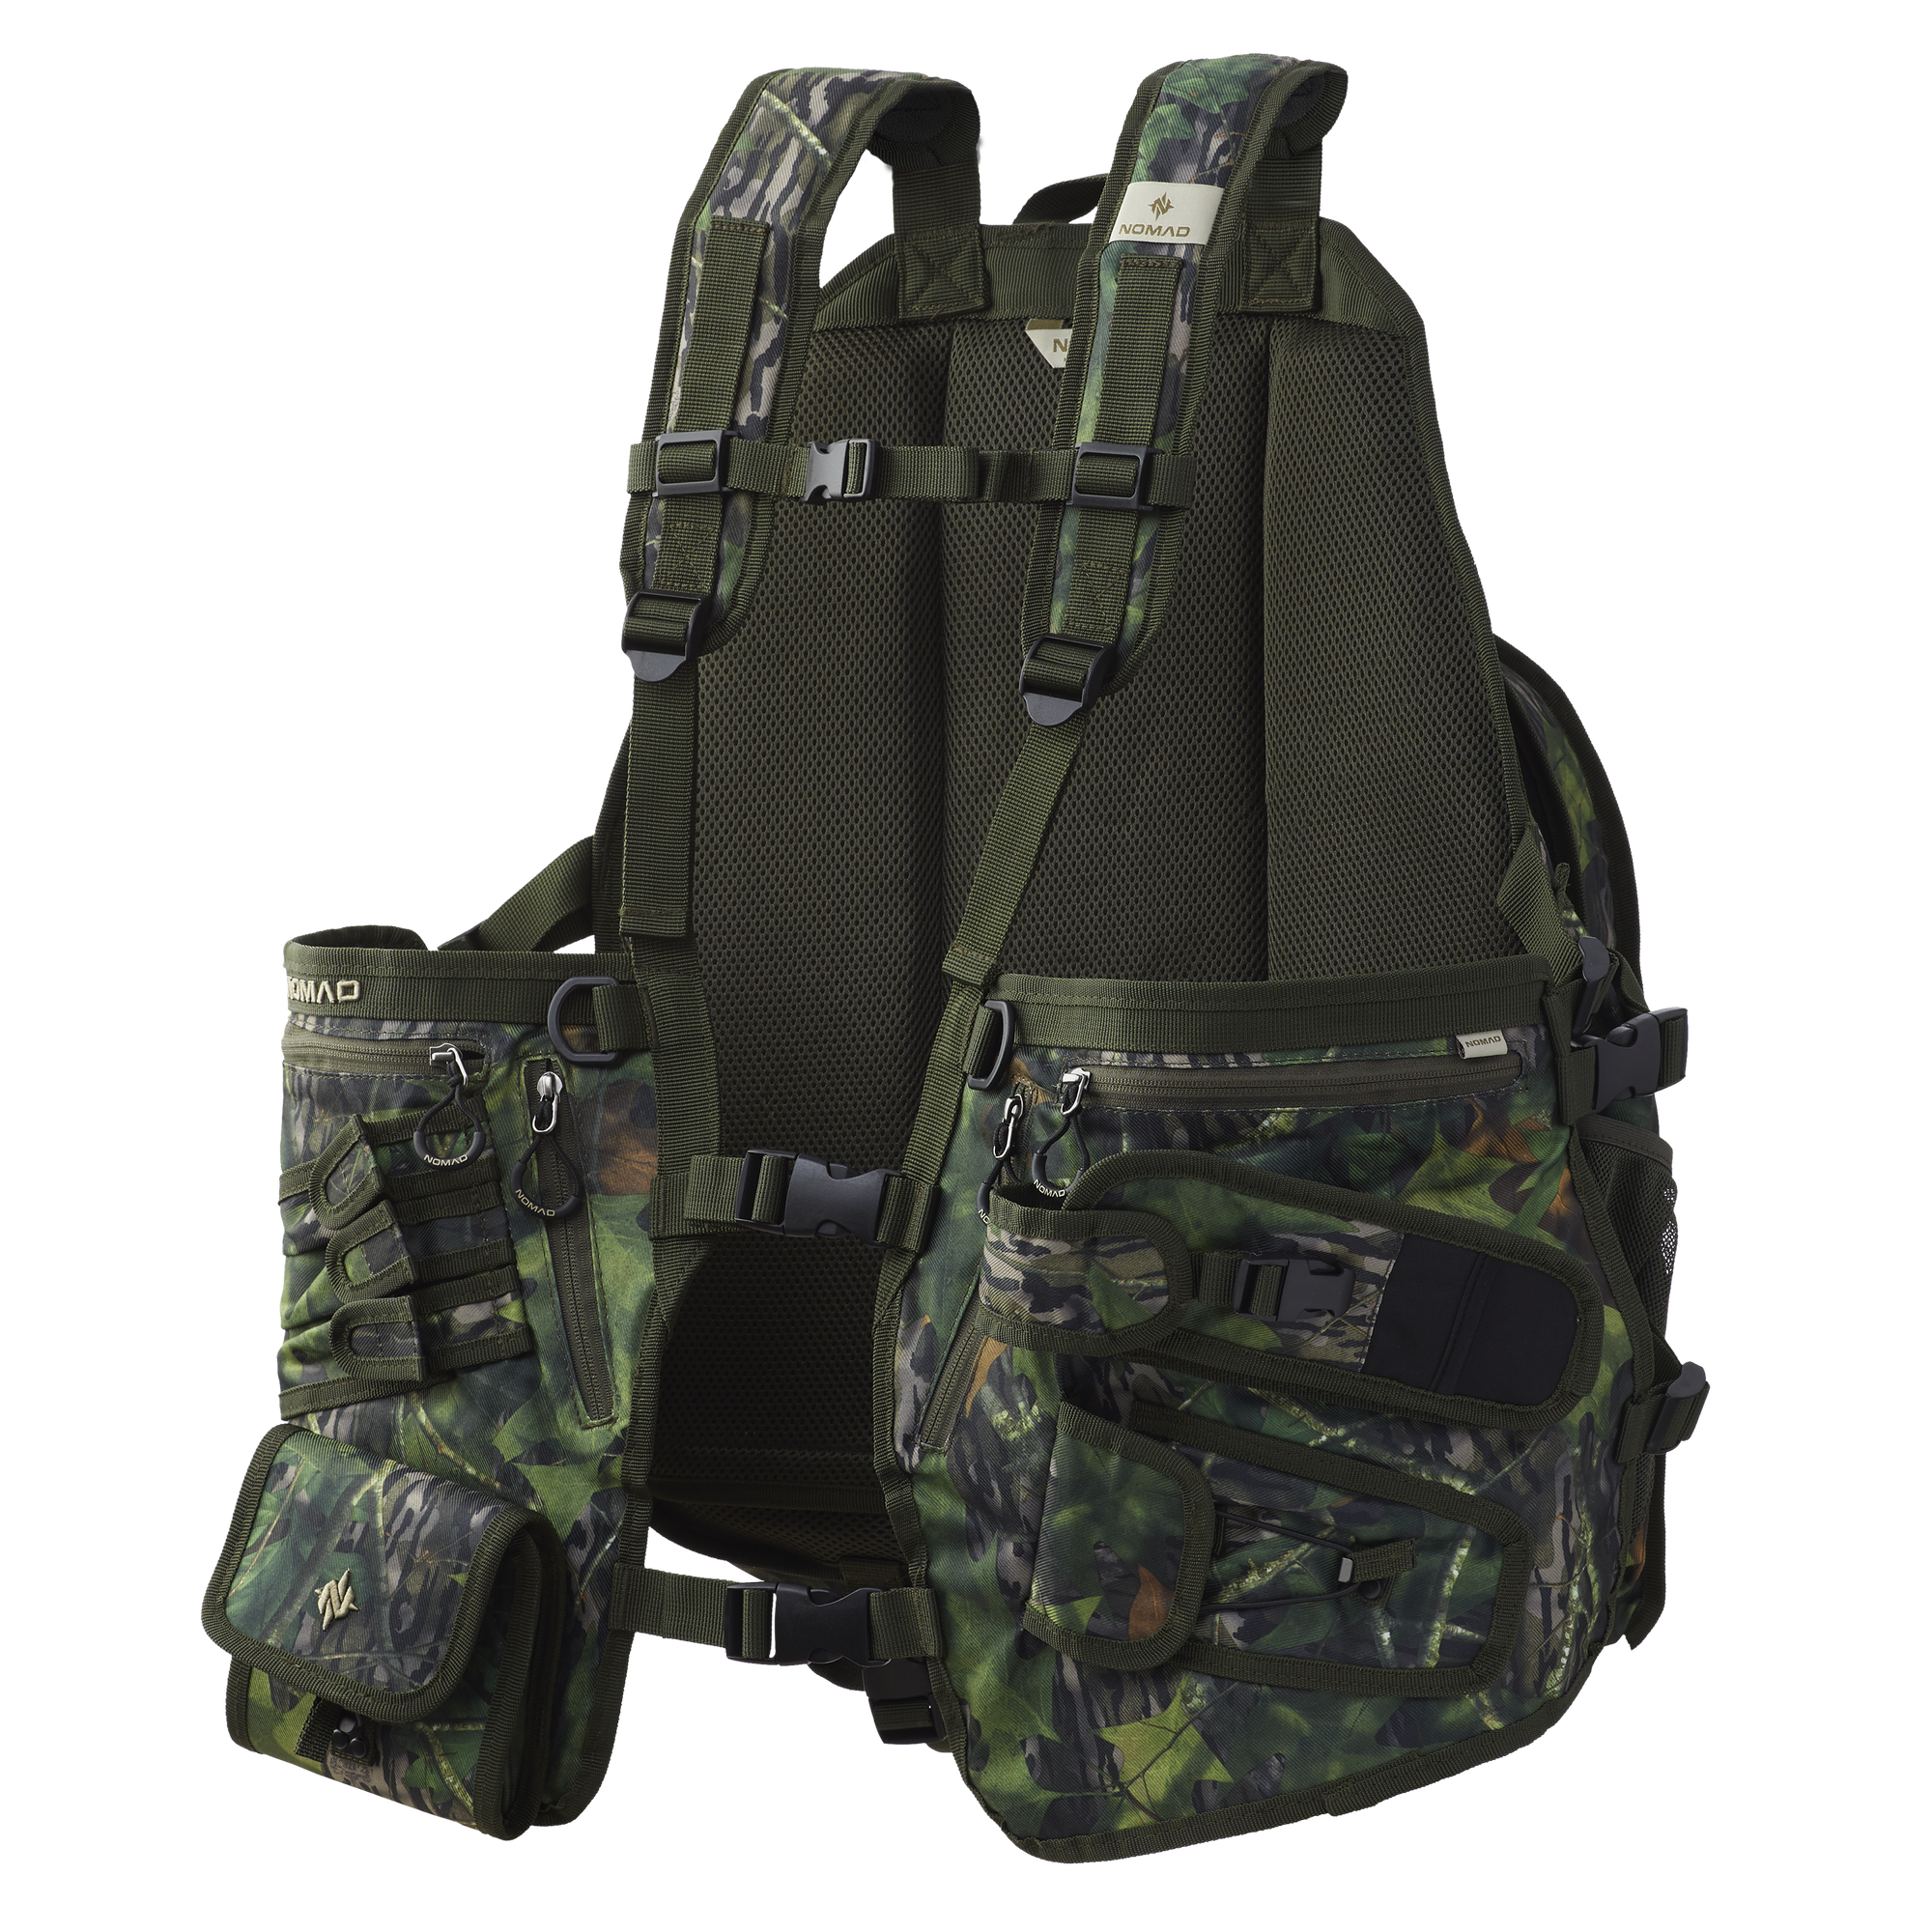 Two New Nomad Premium Turkey Vests Intocied to NWTF Collection